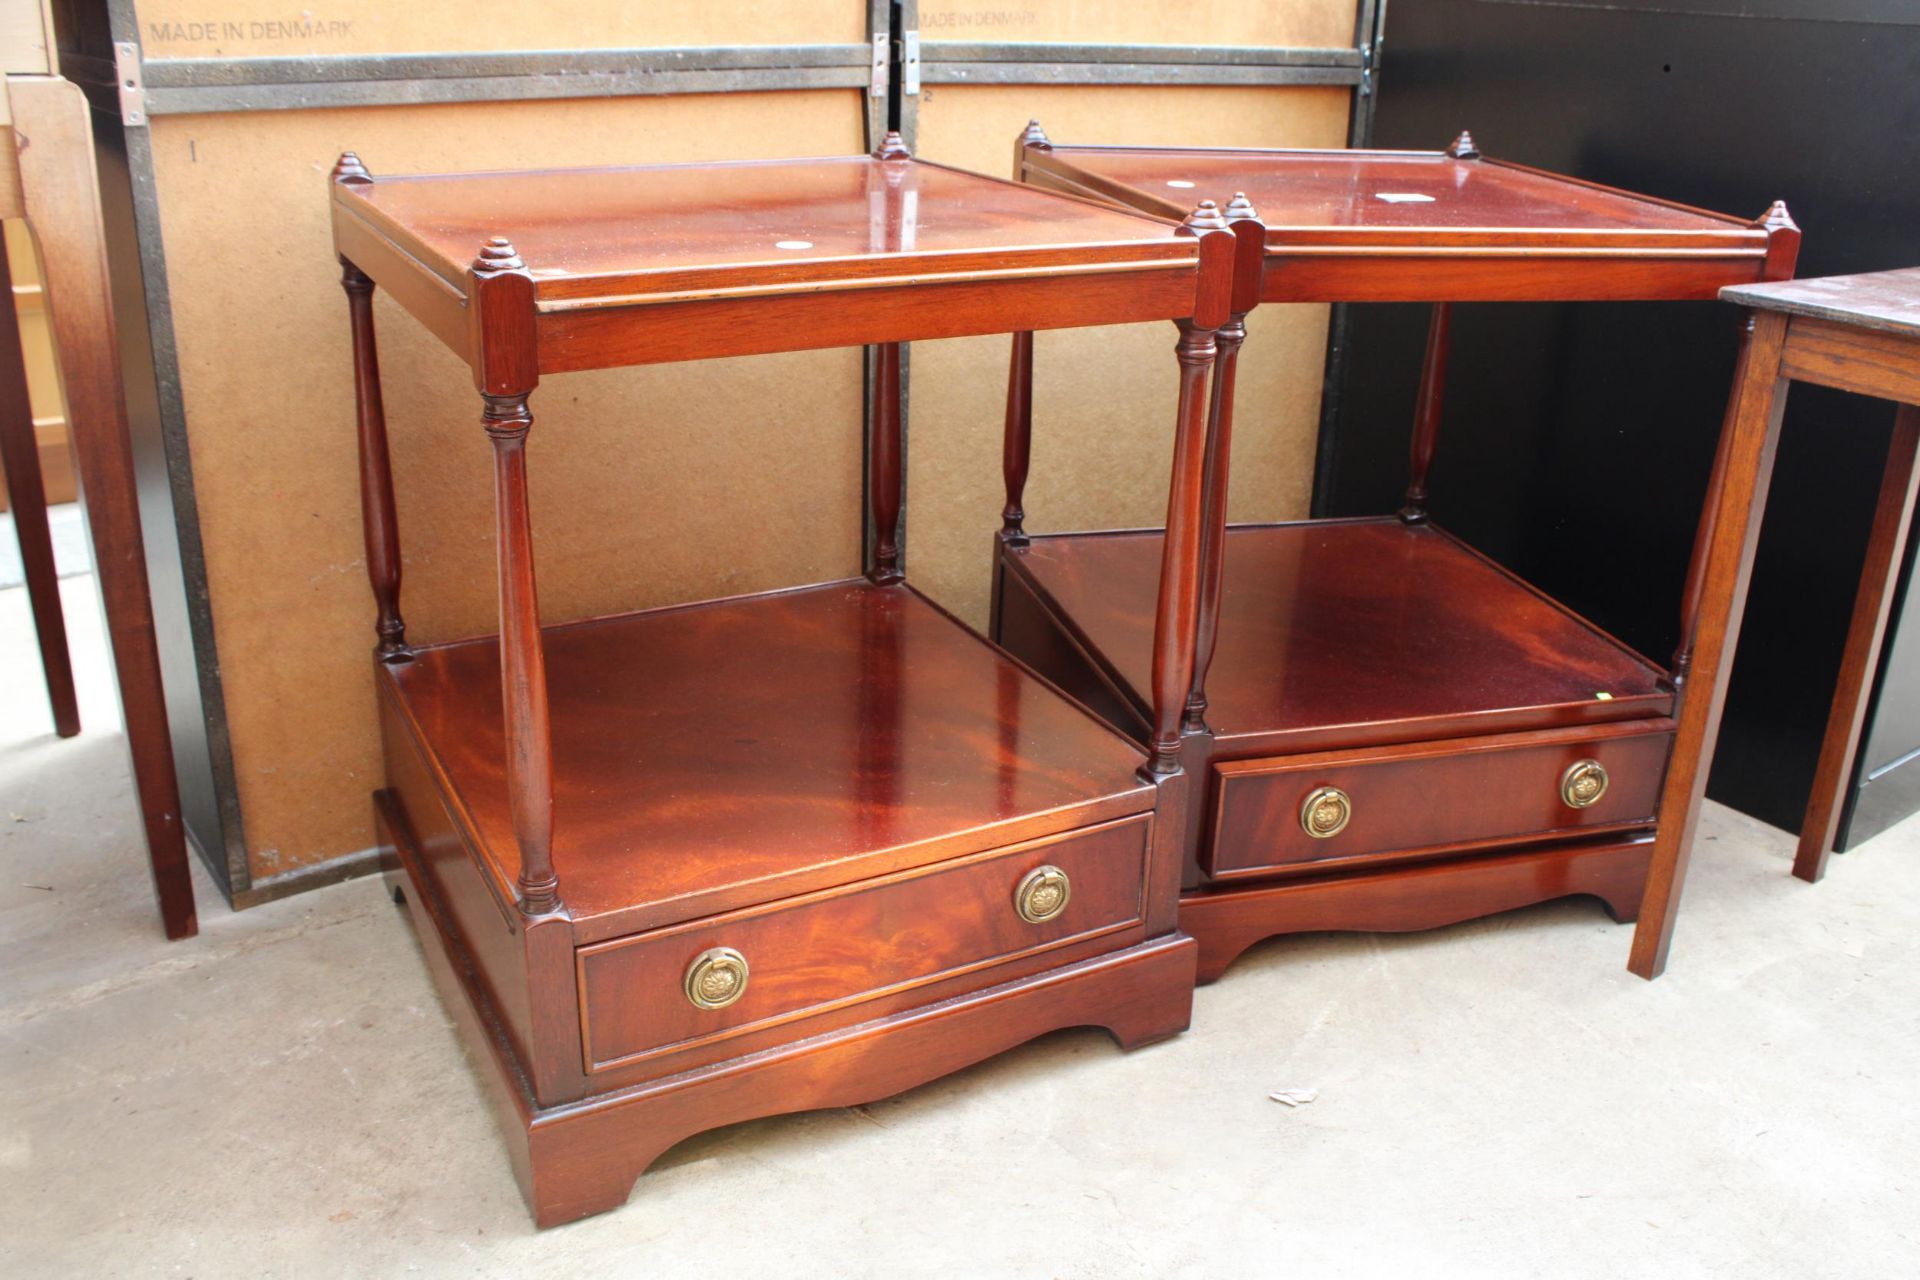 A PAIR OF MAHOGANY IAN SMITH TWO TIER LAMP TABLES WITH SINGLE DRAWER AND TURNED UPRIGHTS, 17" SQUARE - Image 2 of 4